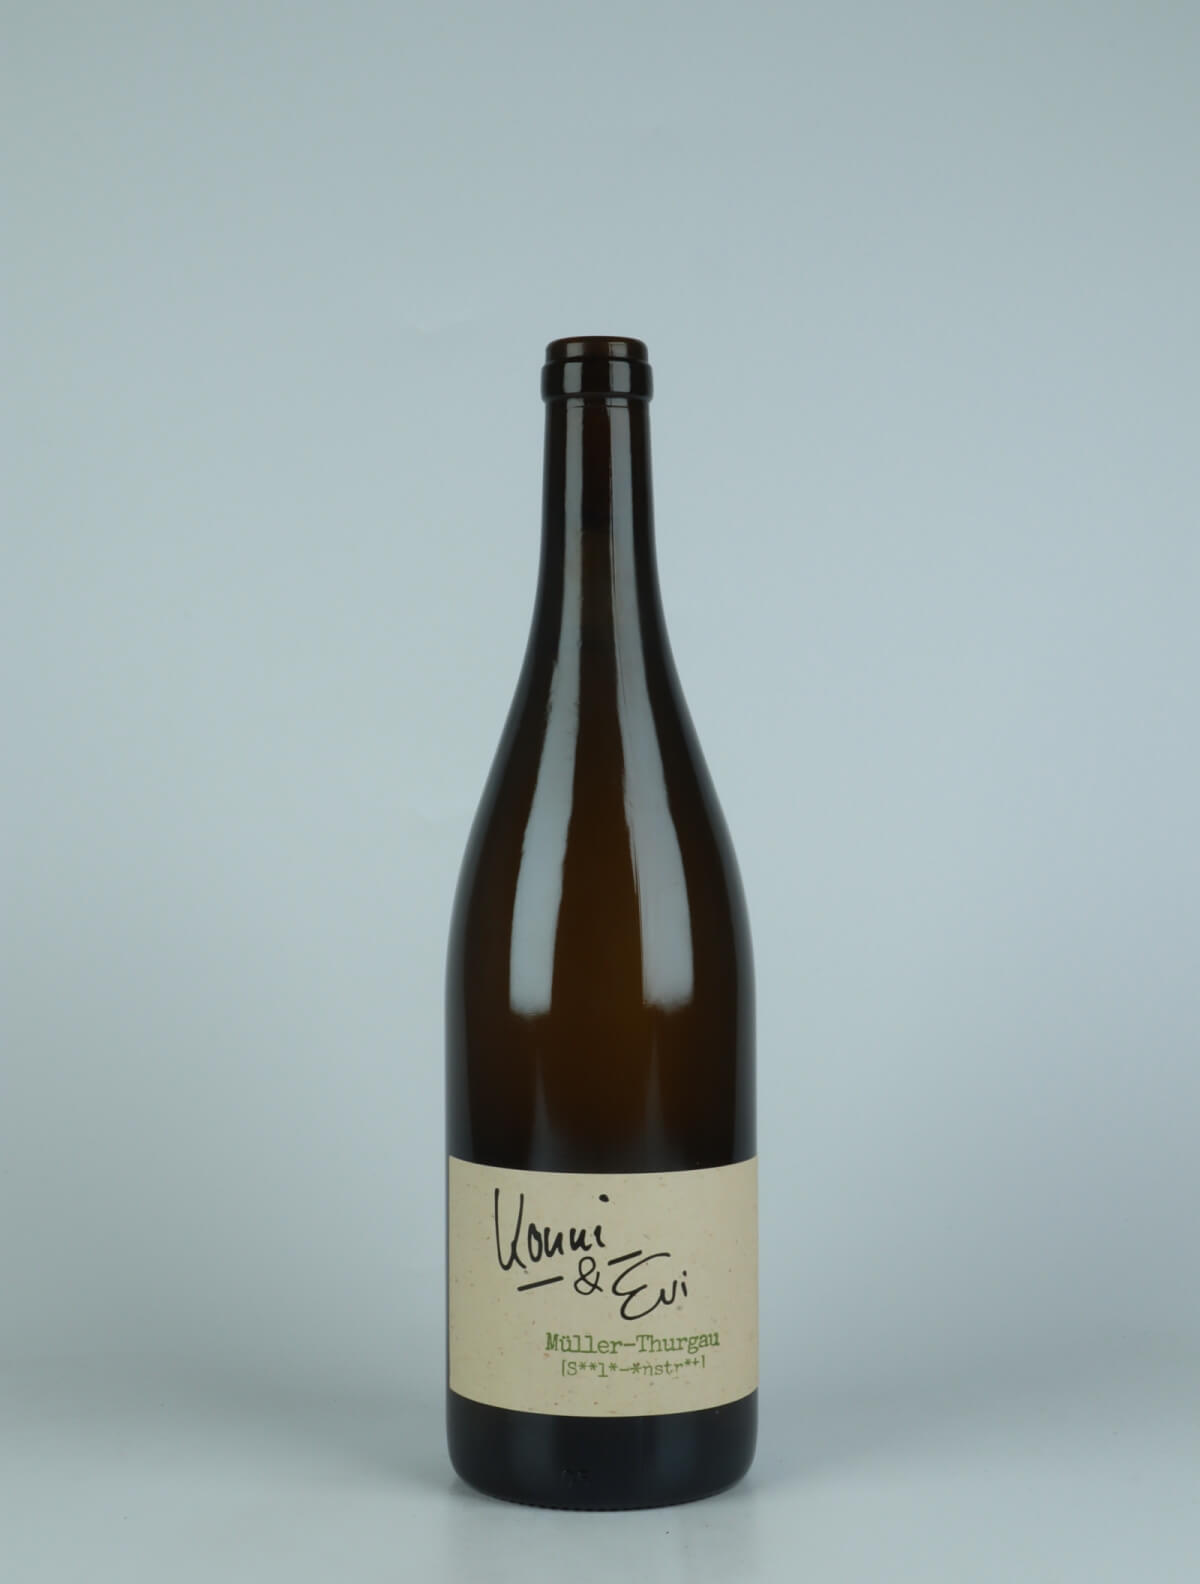 A bottle 2021 Müller-Thurgau White wine from Konni & Evi, Saale-Unstrut in Germany